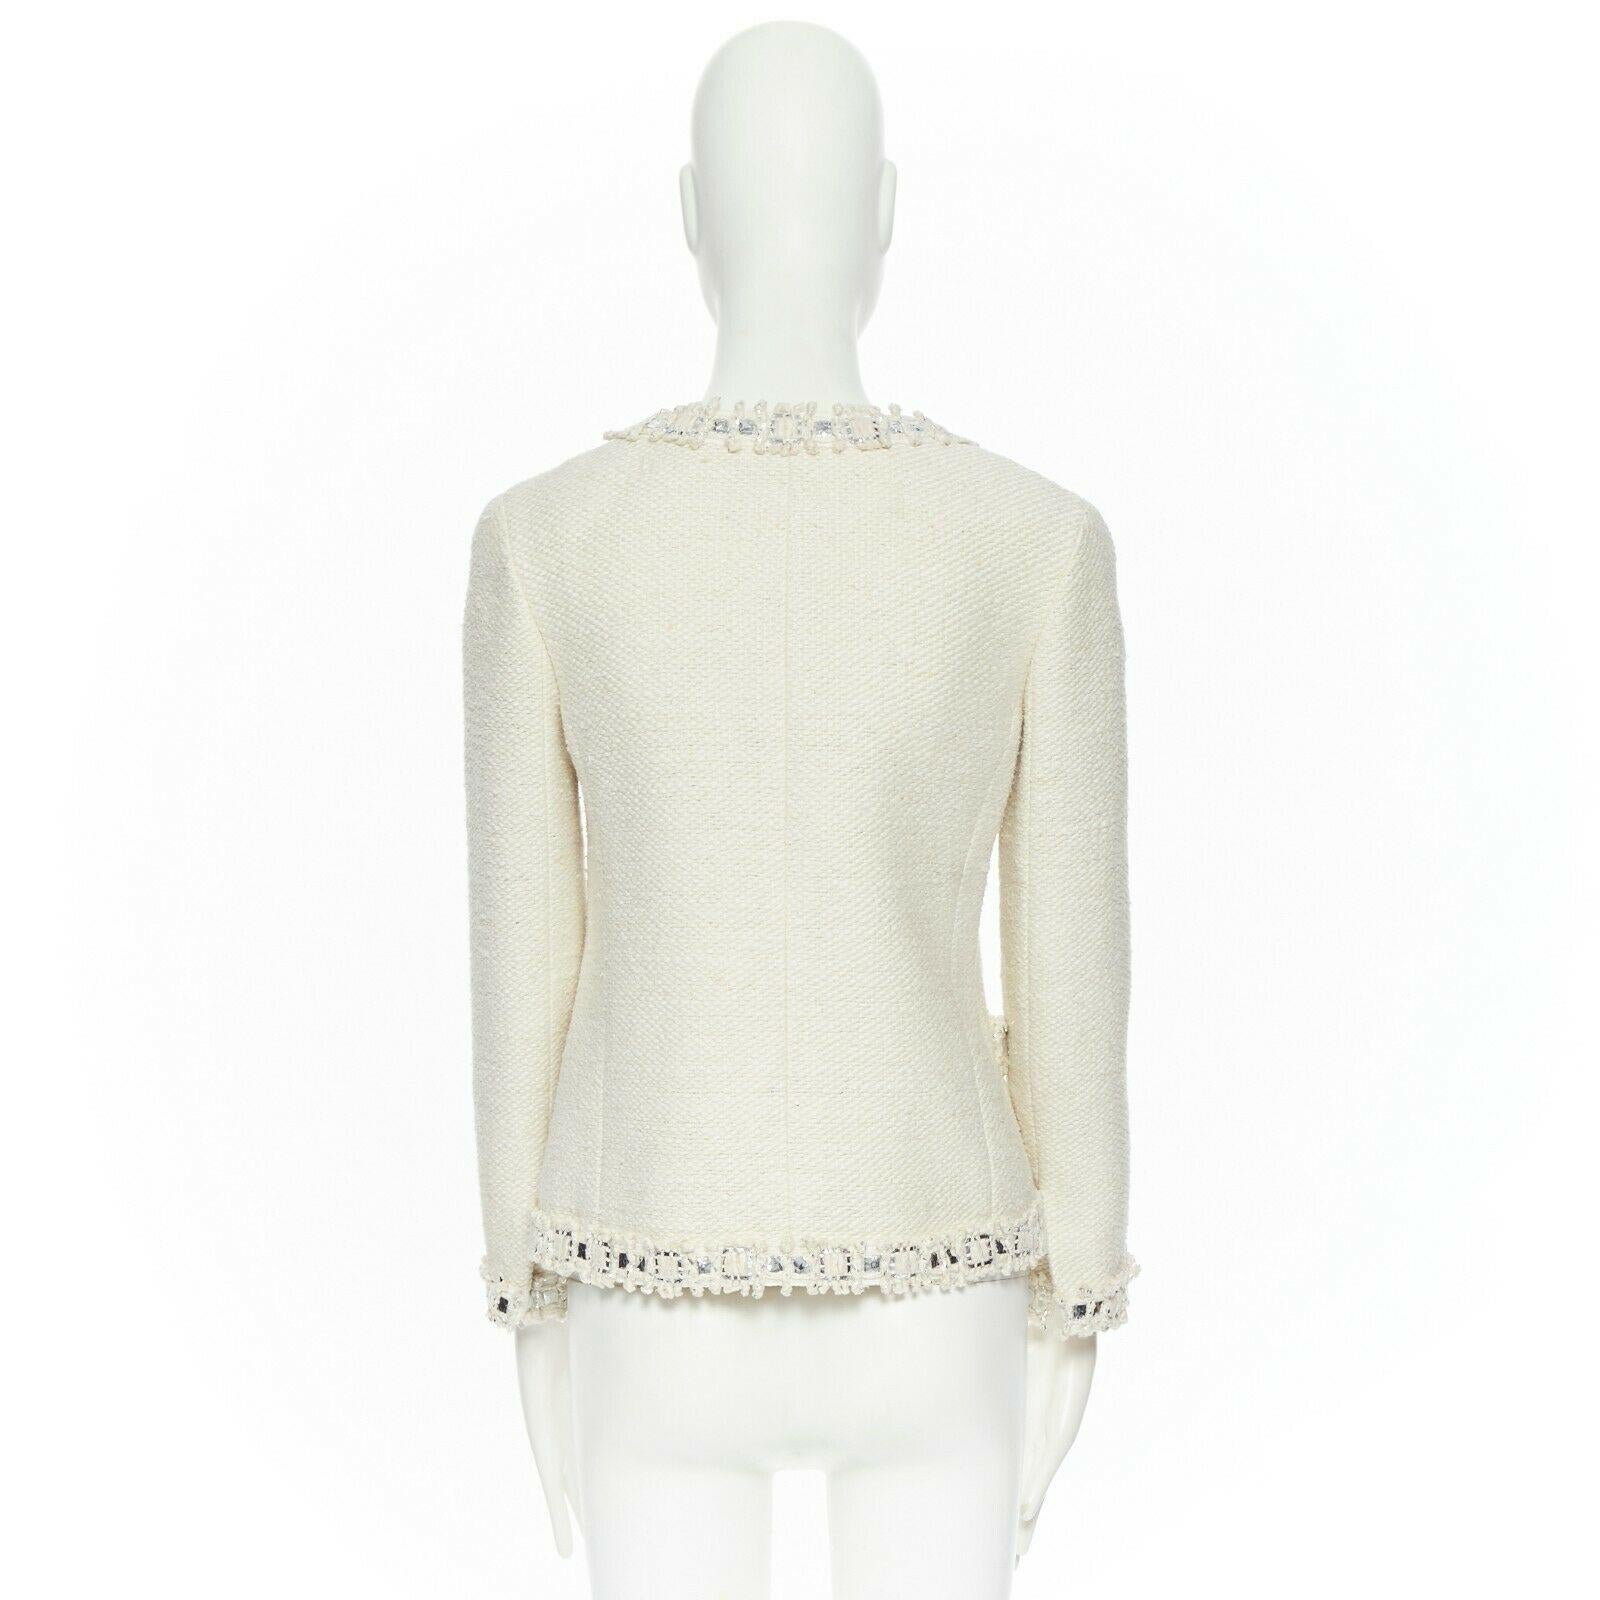 CHANEL classic cream white metallic sequins mixed trimmings tweed jacket FR36 S 2